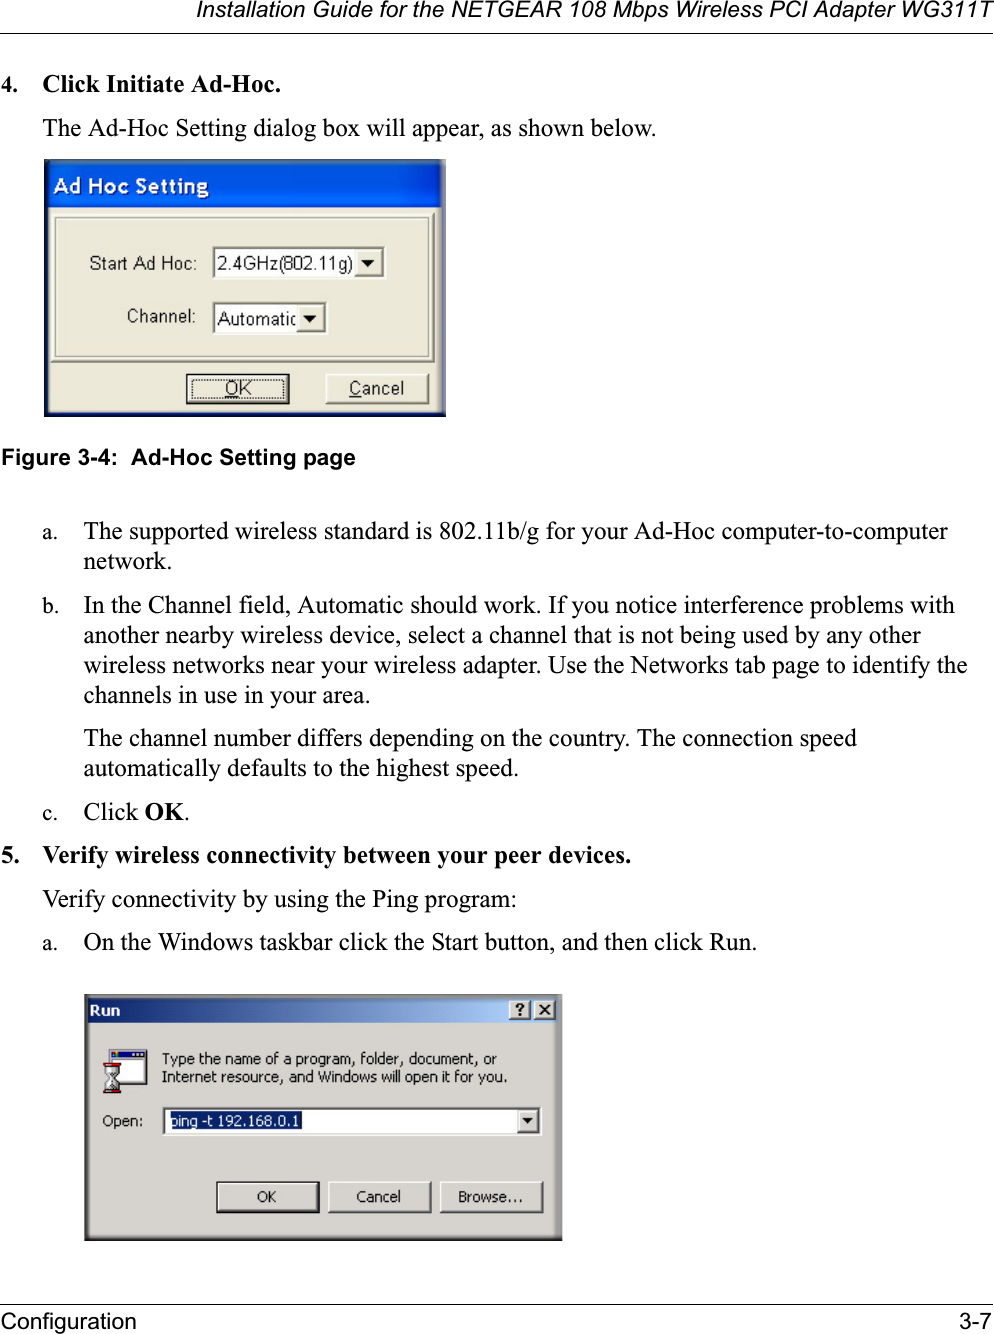 Installation Guide for the NETGEAR 108 Mbps Wireless PCI Adapter WG311TConfiguration 3-74. Click Initiate Ad-Hoc. The Ad-Hoc Setting dialog box will appear, as shown below.Figure 3-4:  Ad-Hoc Setting pagea. The supported wireless standard is 802.11b/g for your Ad-Hoc computer-to-computer network.b. In the Channel field, Automatic should work. If you notice interference problems with another nearby wireless device, select a channel that is not being used by any other wireless networks near your wireless adapter. Use the Networks tab page to identify the channels in use in your area.The channel number differs depending on the country. The connection speed automatically defaults to the highest speed.c. Click OK.5. Verify wireless connectivity between your peer devices.Verify connectivity by using the Ping program:a. On the Windows taskbar click the Start button, and then click Run.